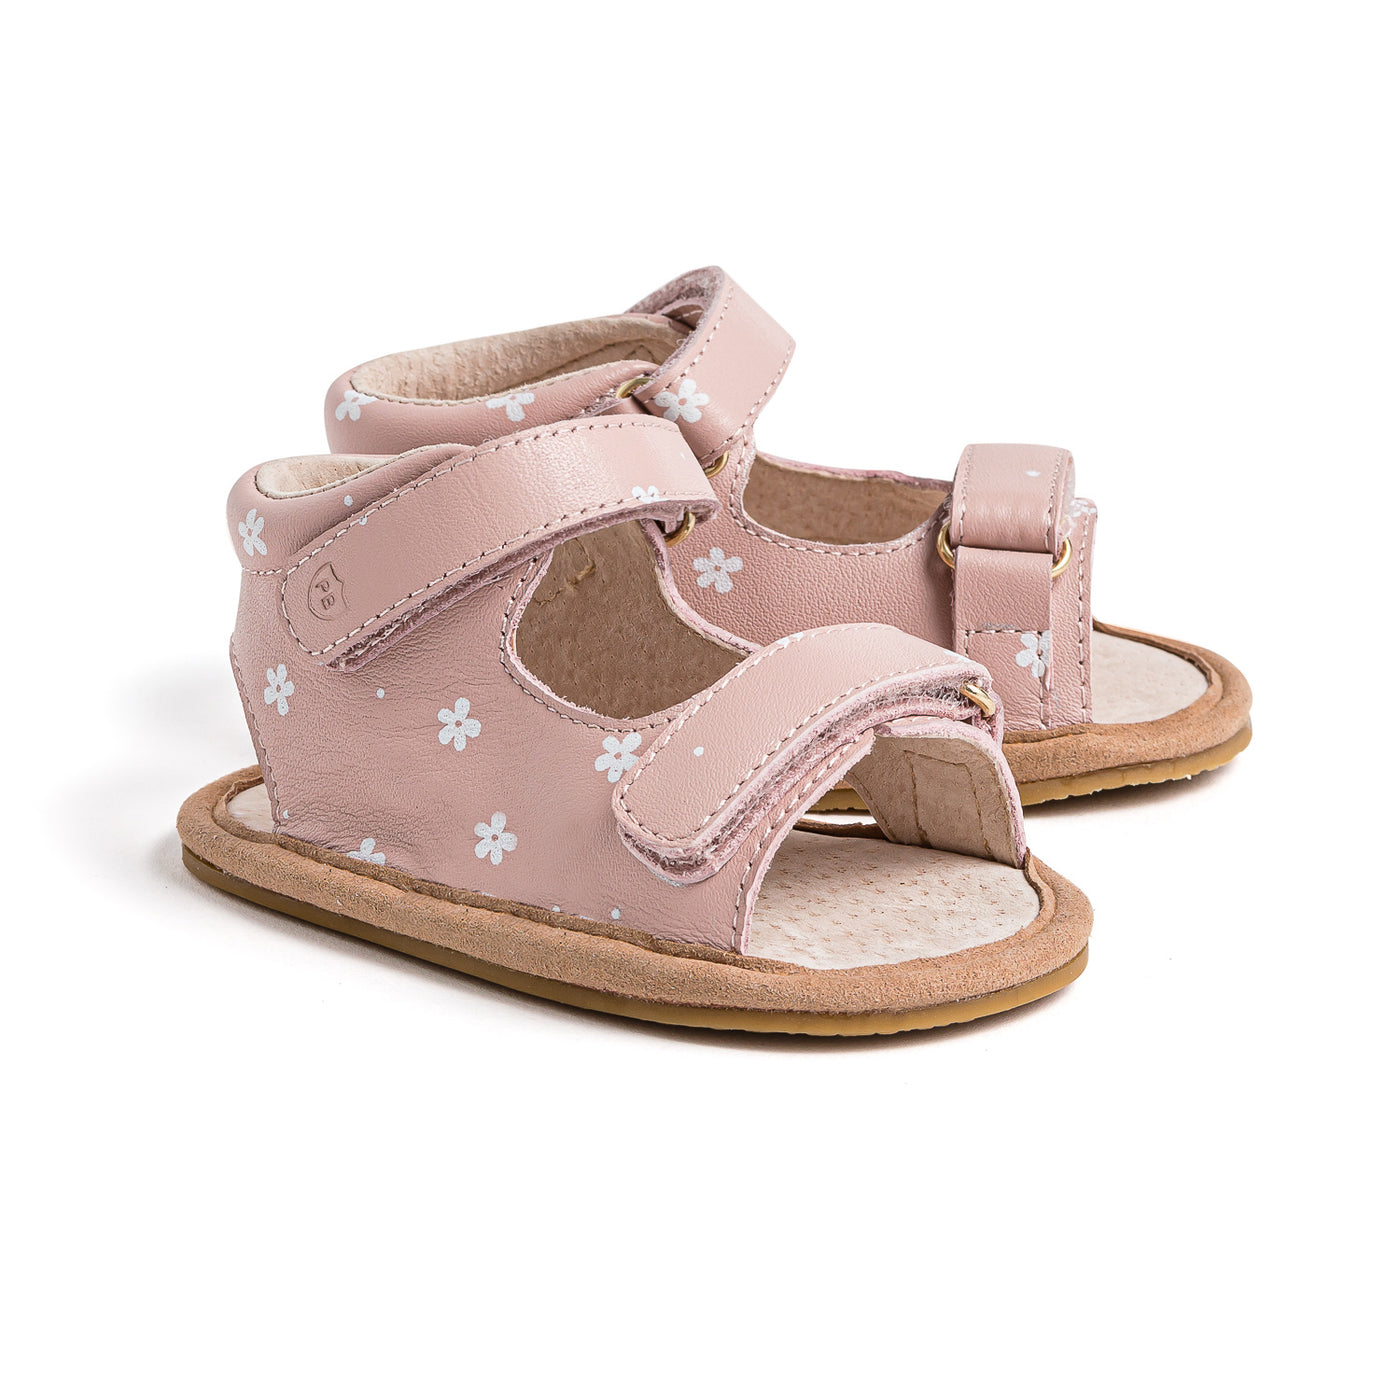 Pair of baby pink sandals with white daisy detail